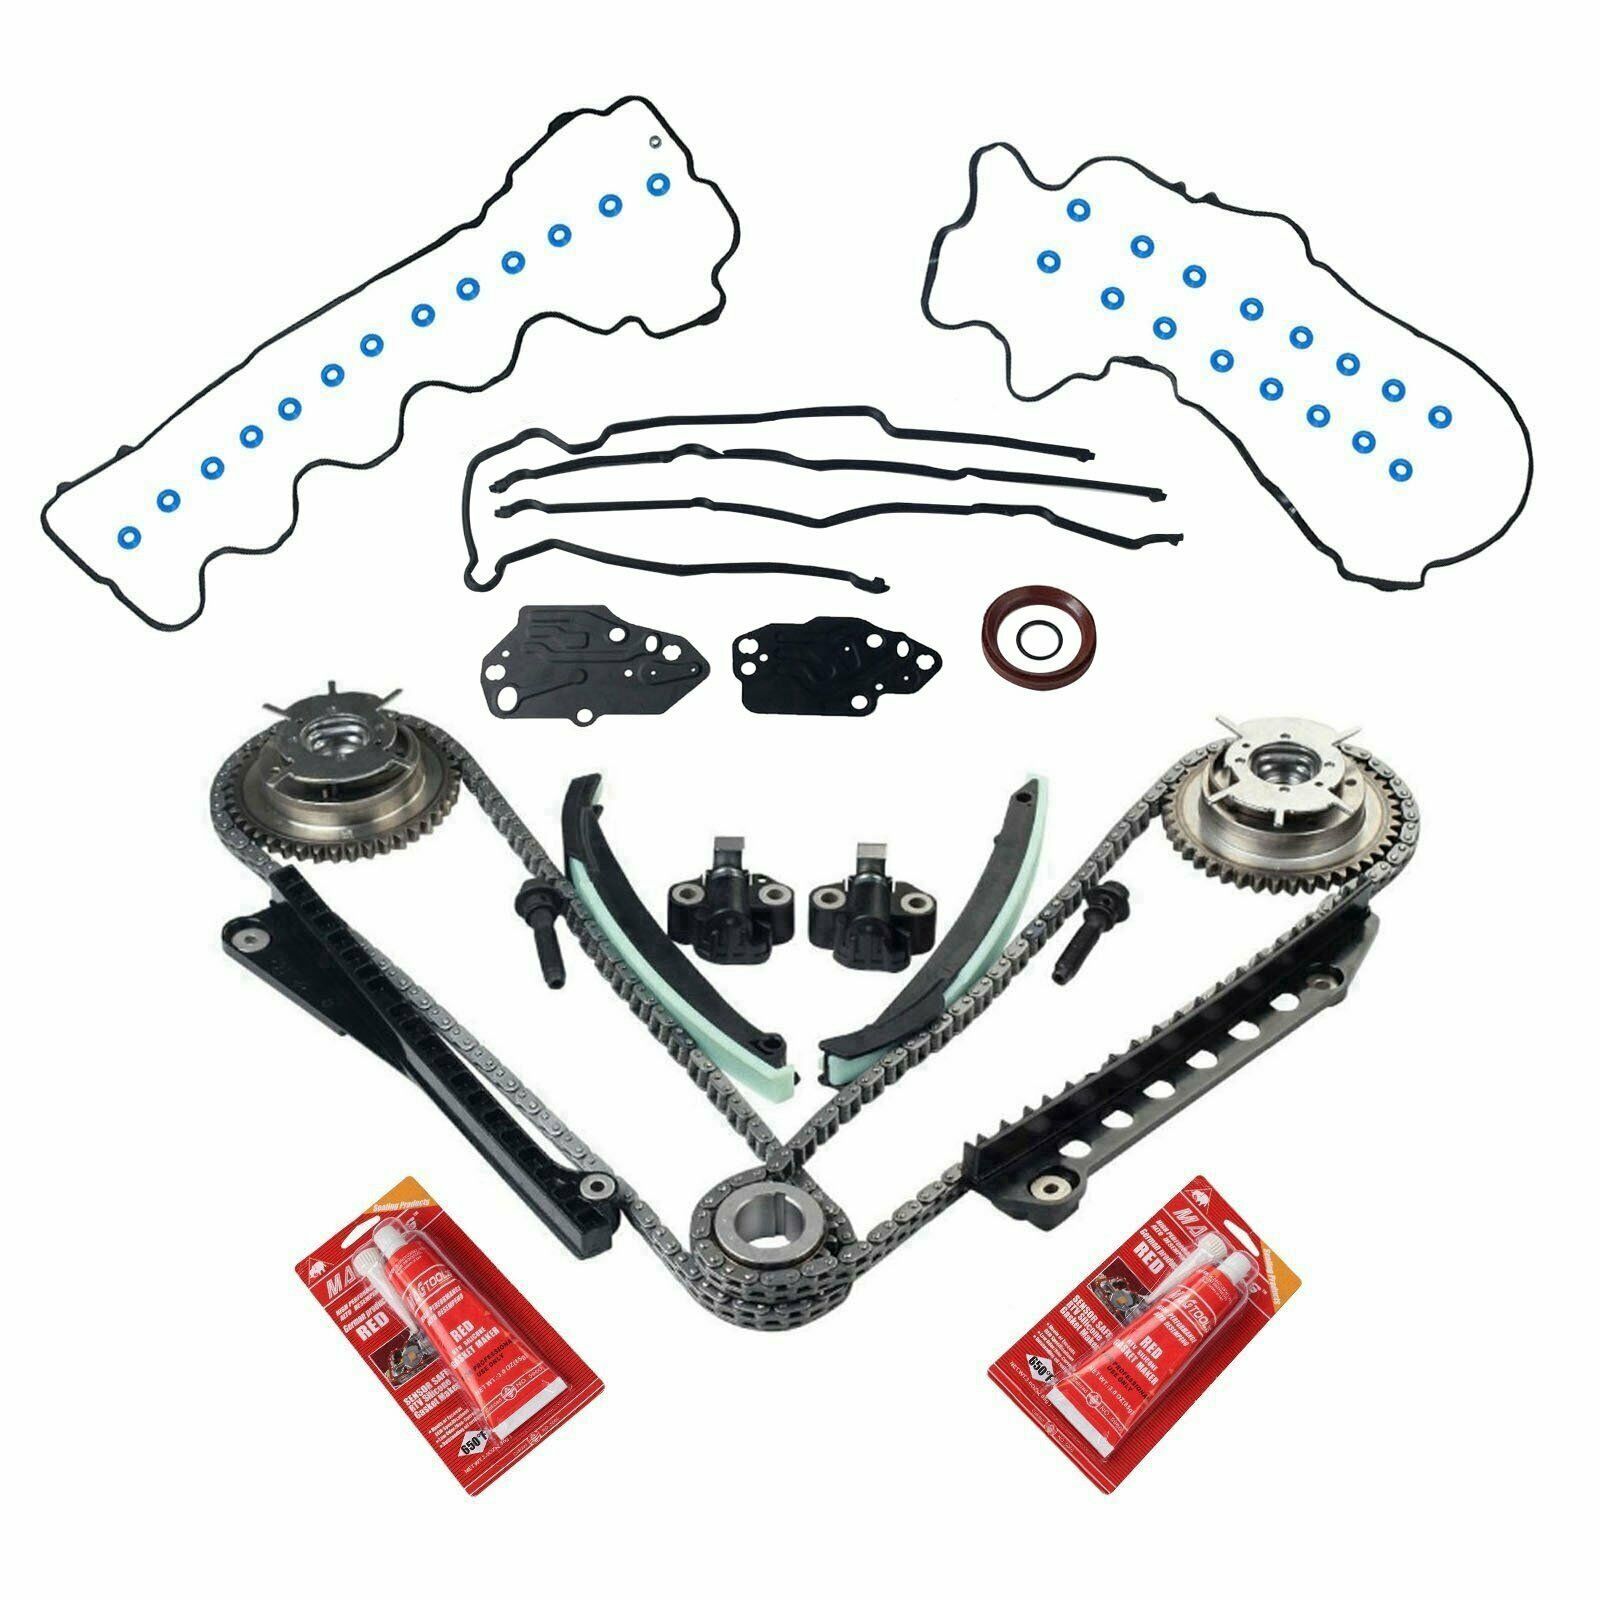 Timing Chain Kit+Cam Phasers+Cover Gasket 04-08 For Ford F150 Lincoln 5.4L 3V